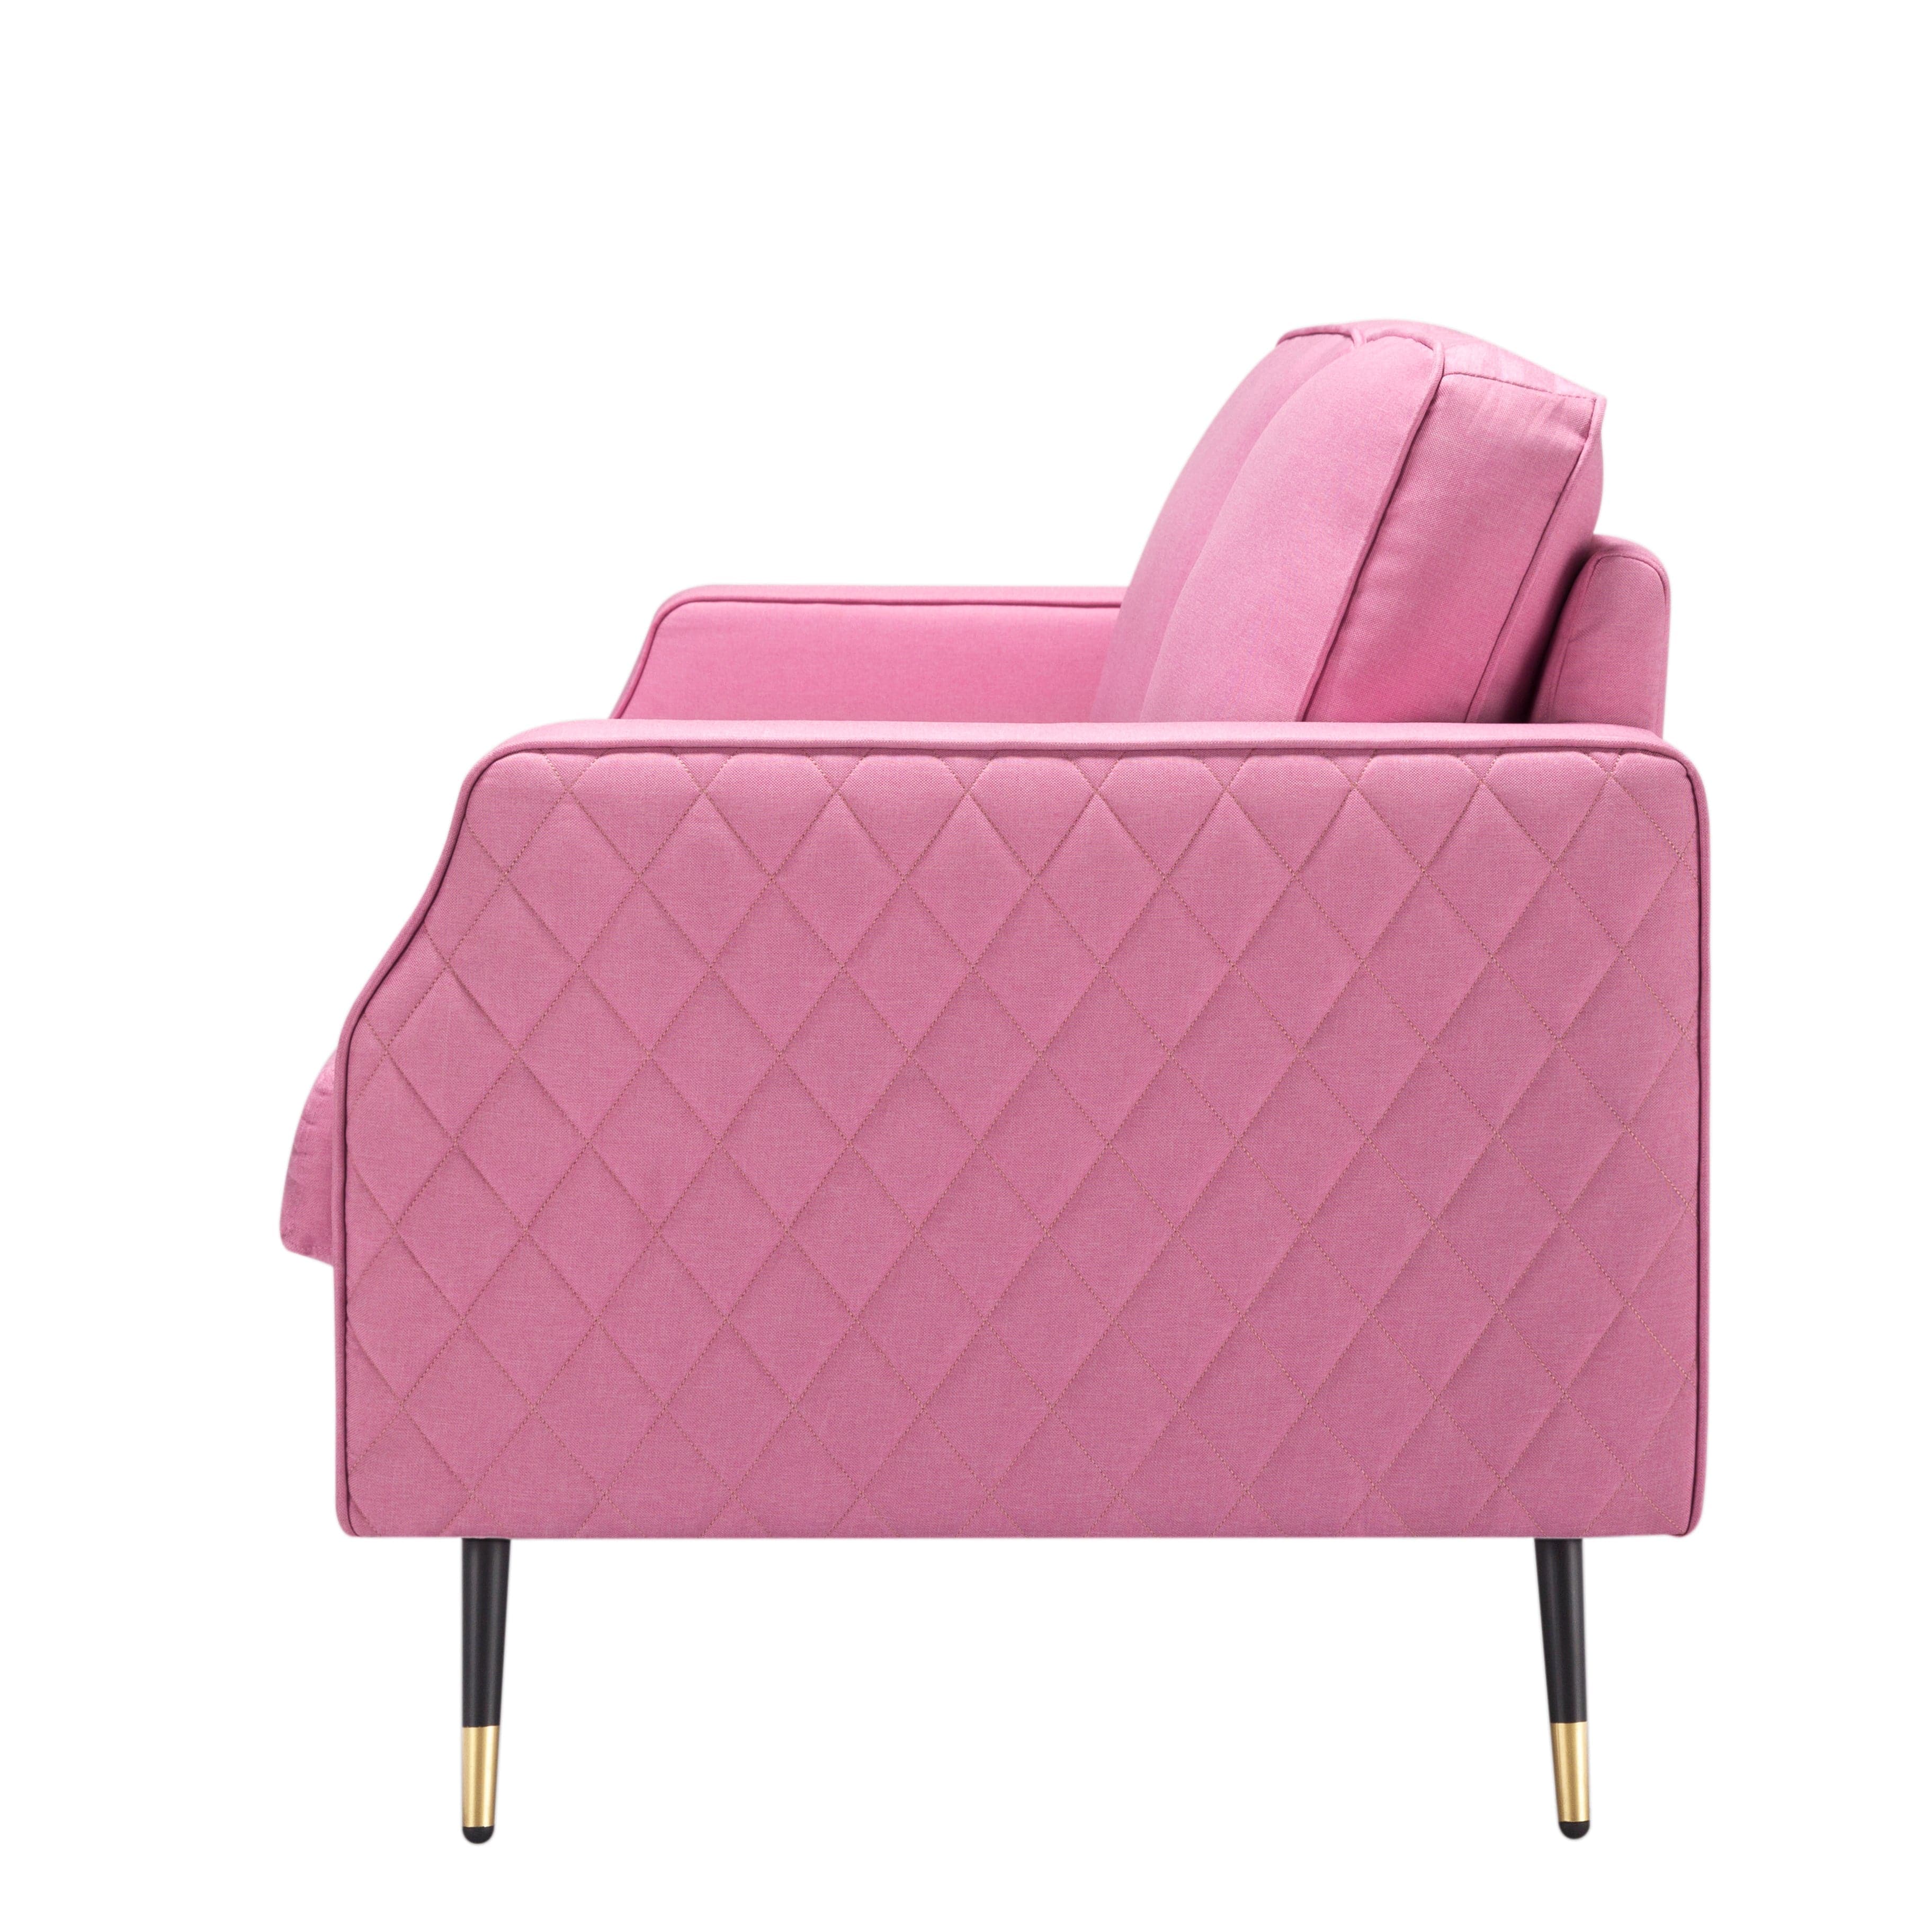 - TFC&H Co. 56.5” Square Arm Loveseat - Pink- Ships from The US - loveseat at TFC&H Co.